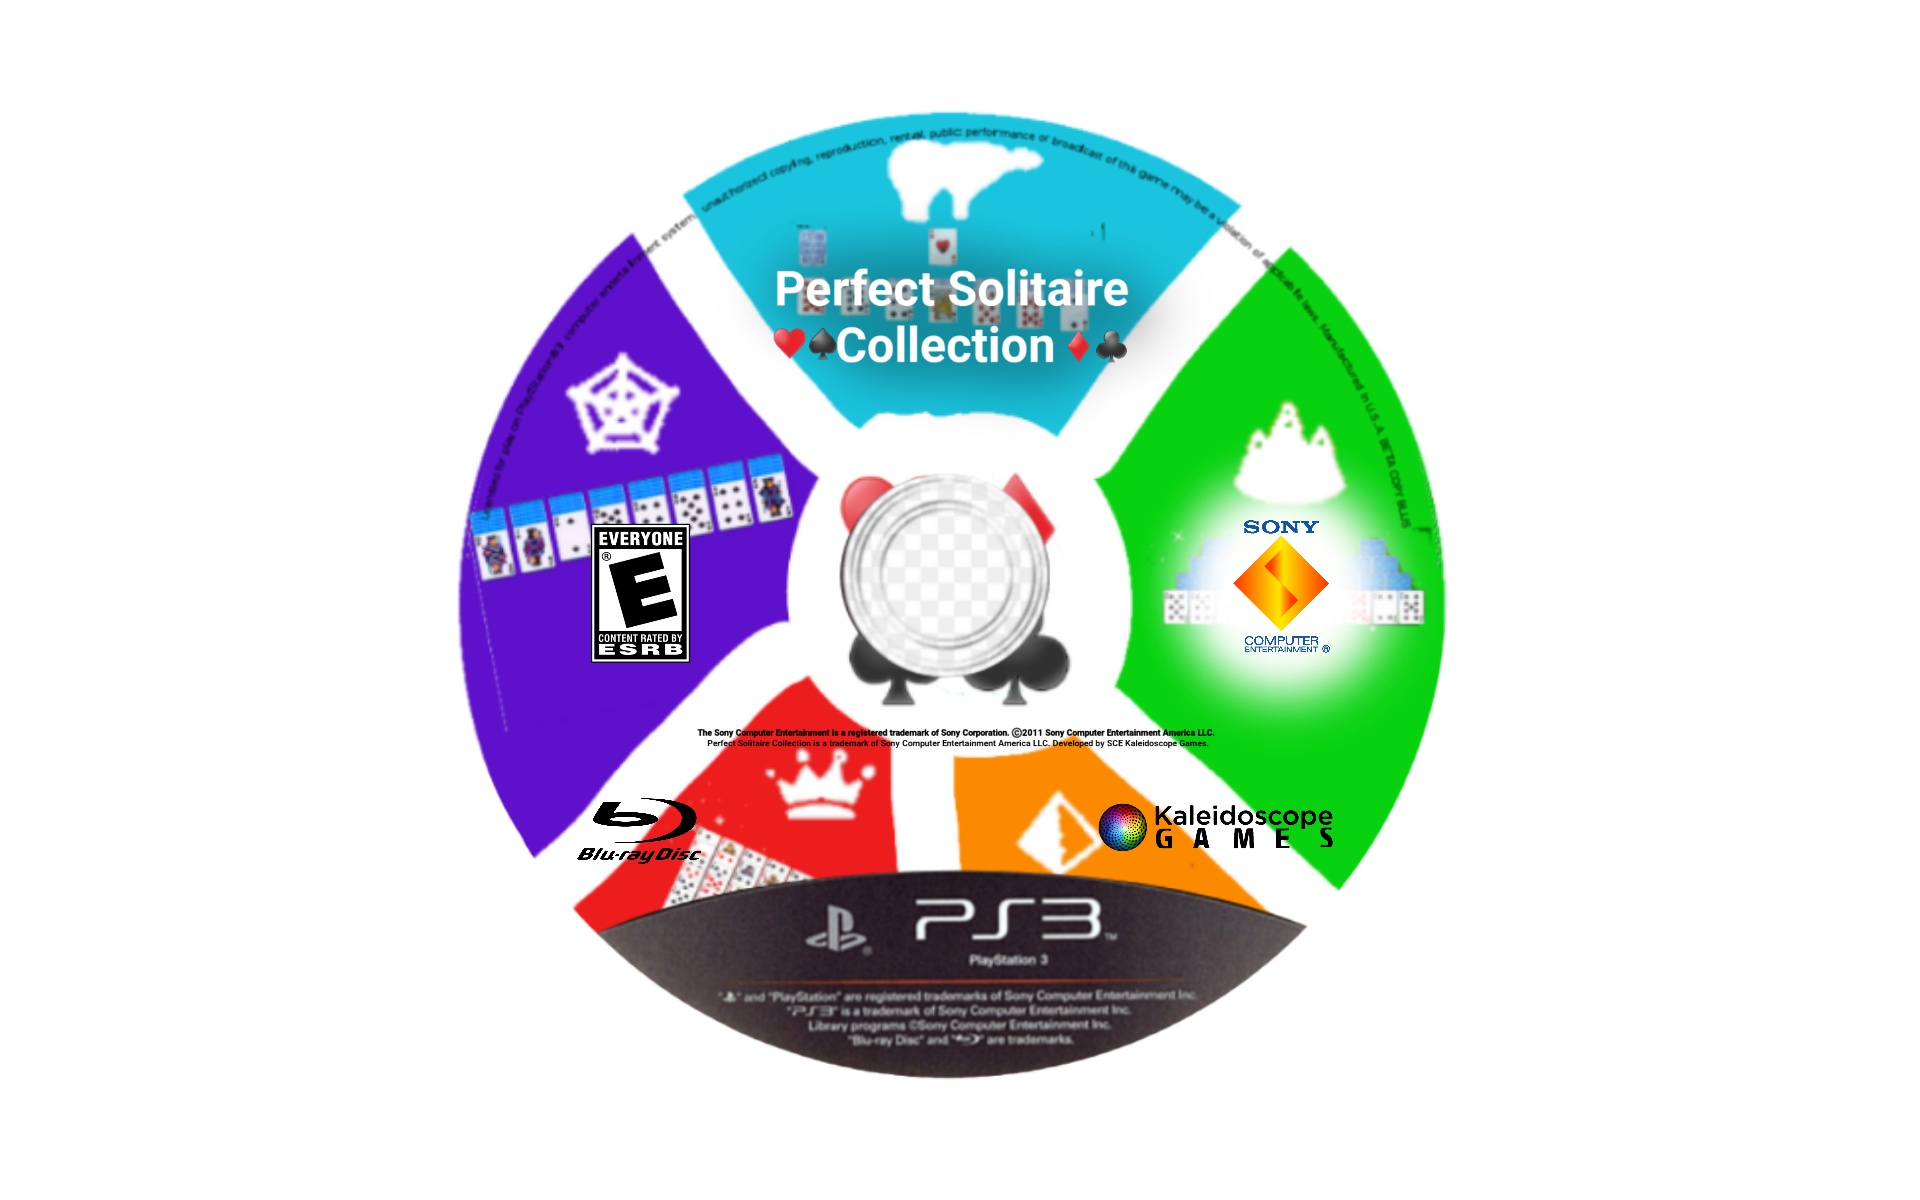 Perfect Solitaire Collection for PS3 Front by YahirOro19 on DeviantArt